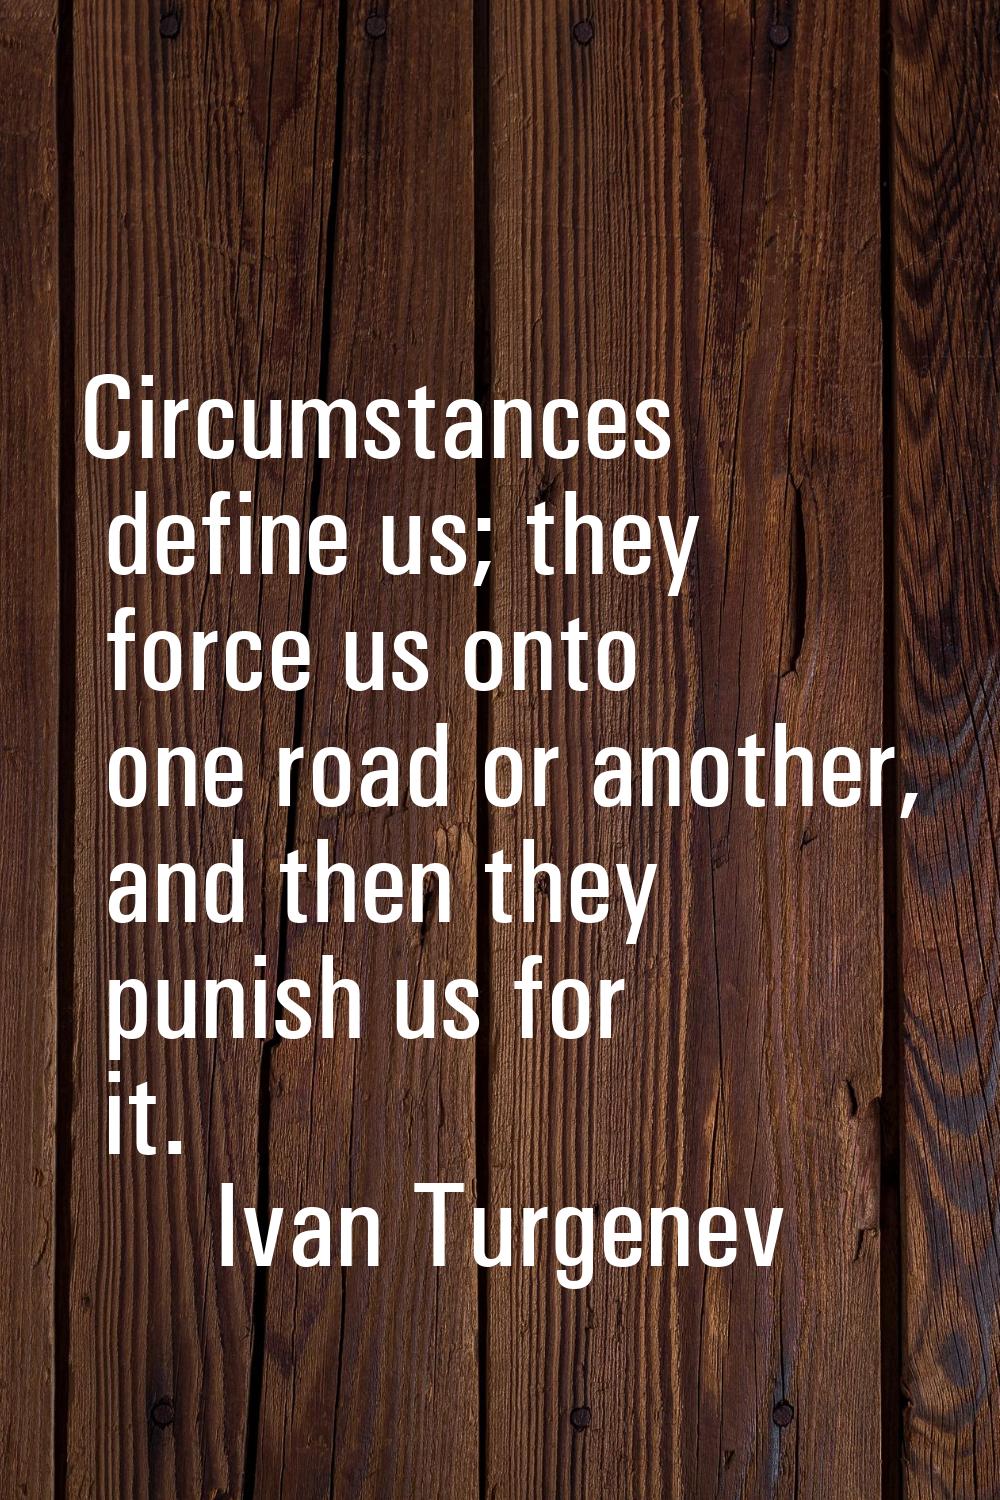 Circumstances define us; they force us onto one road or another, and then they punish us for it.